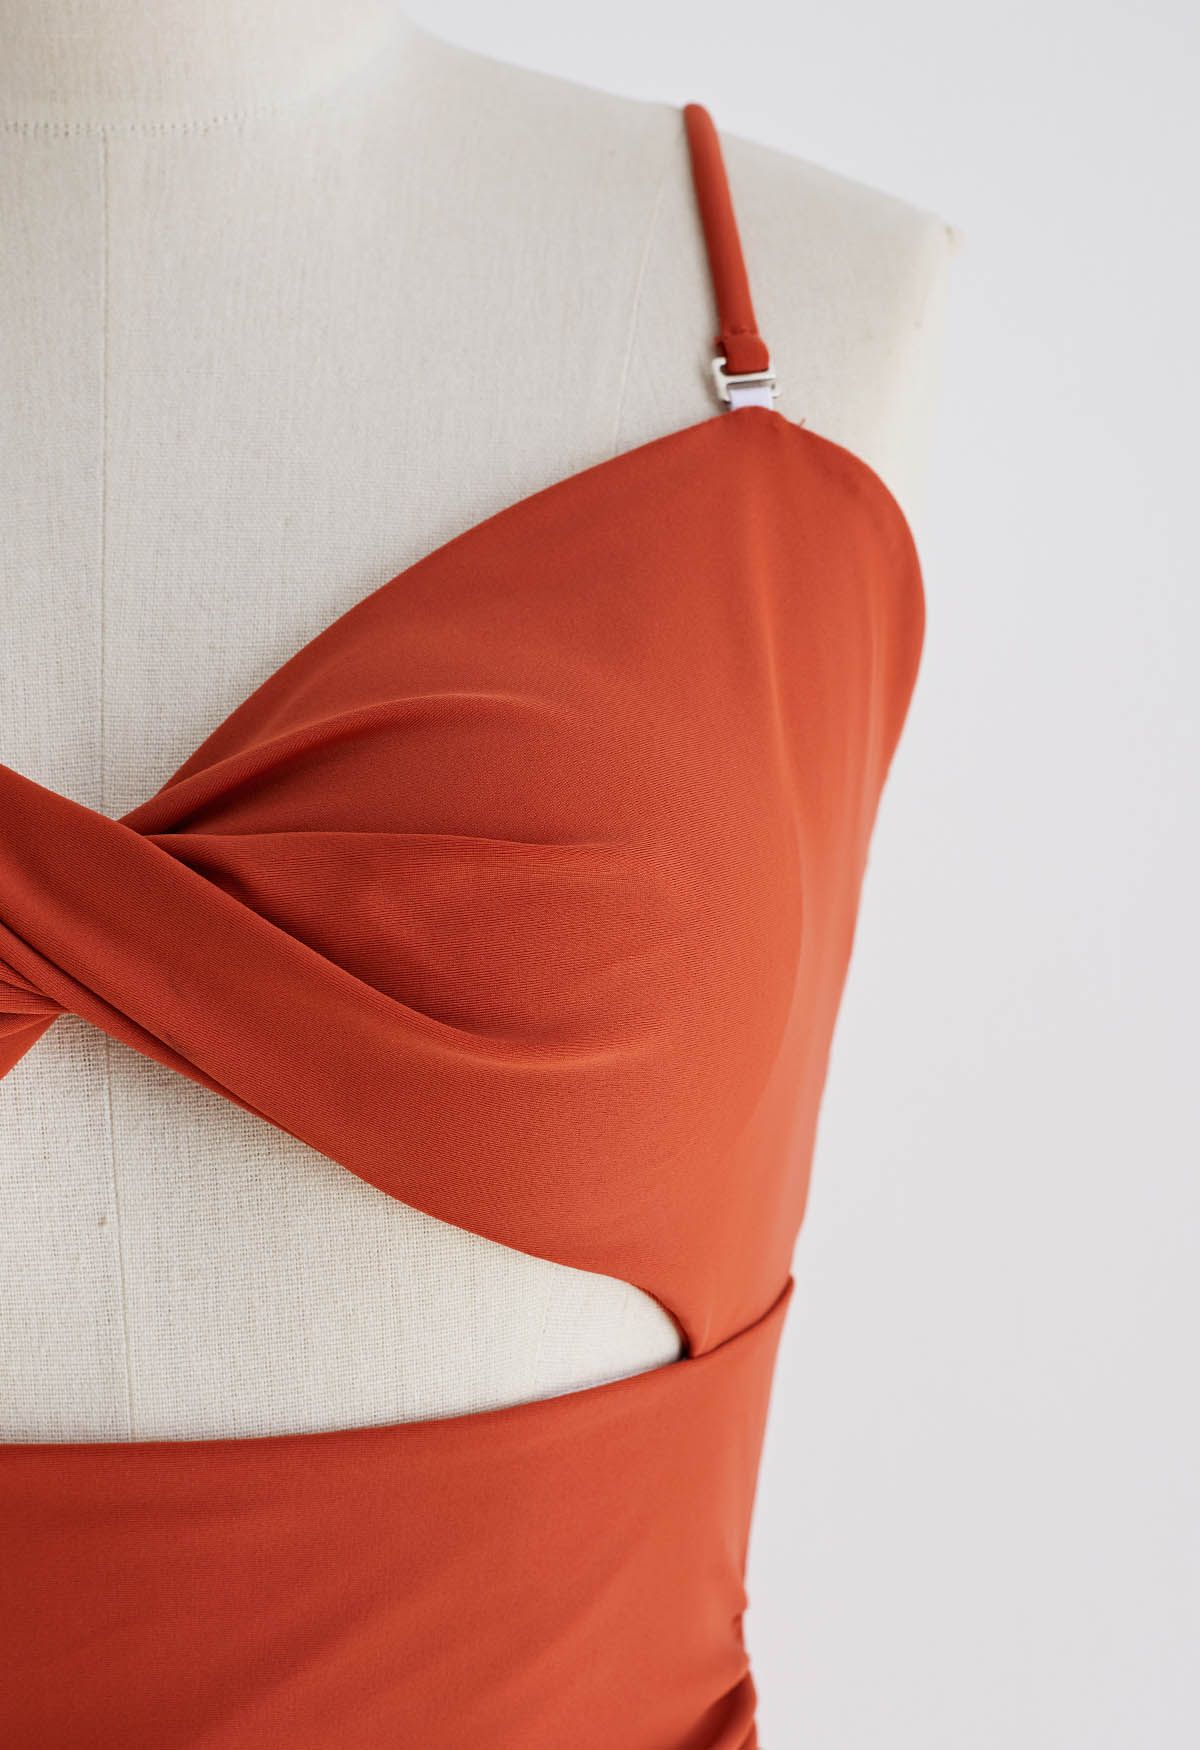 Twisted Front Cutout Swimsuit in Rust Red